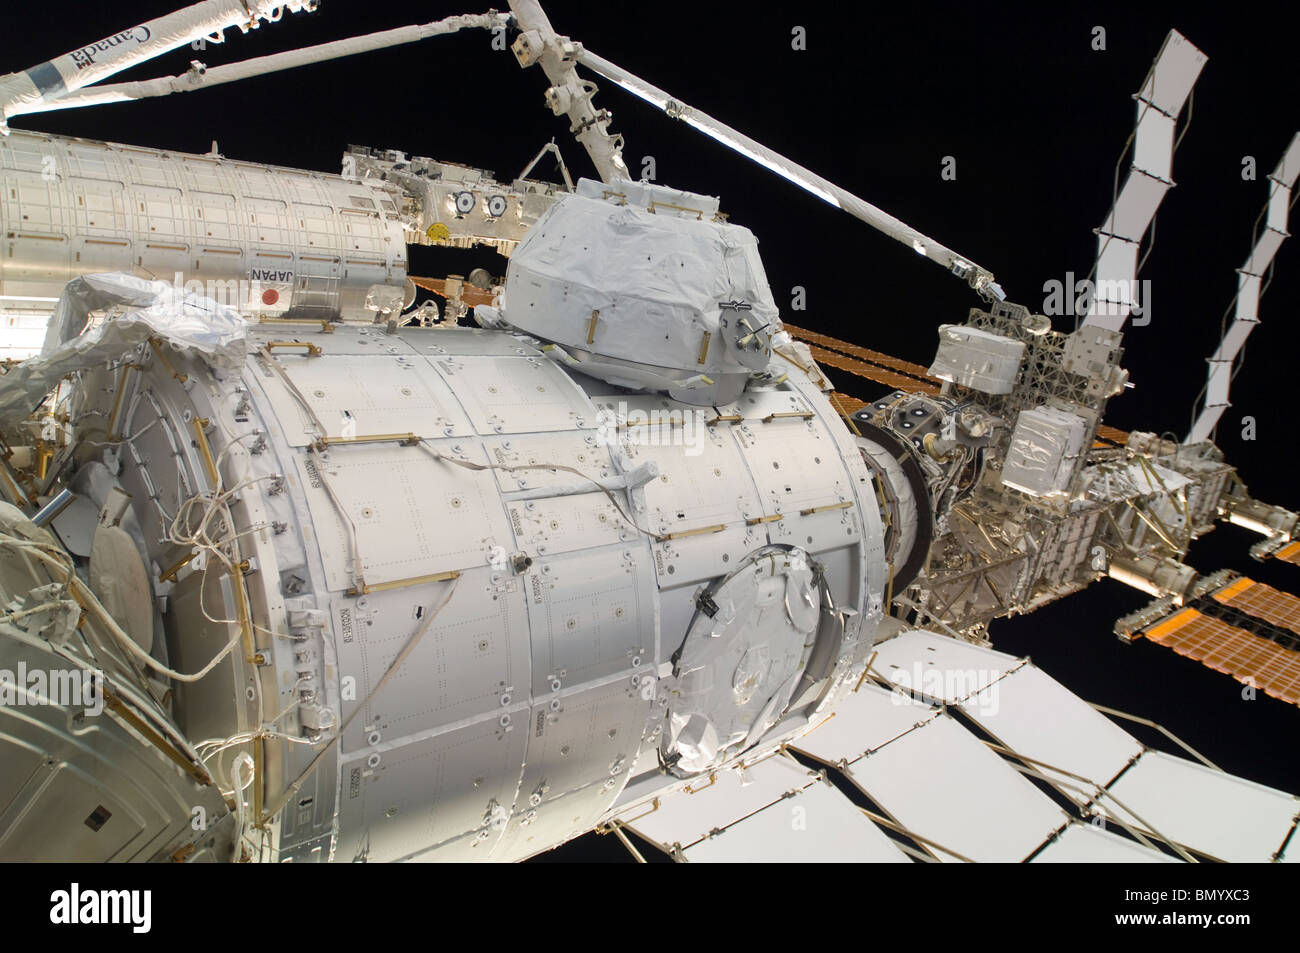 The Pressurized Mating Adapter 3 in the grasp of the Canadarm2. Stock Photo